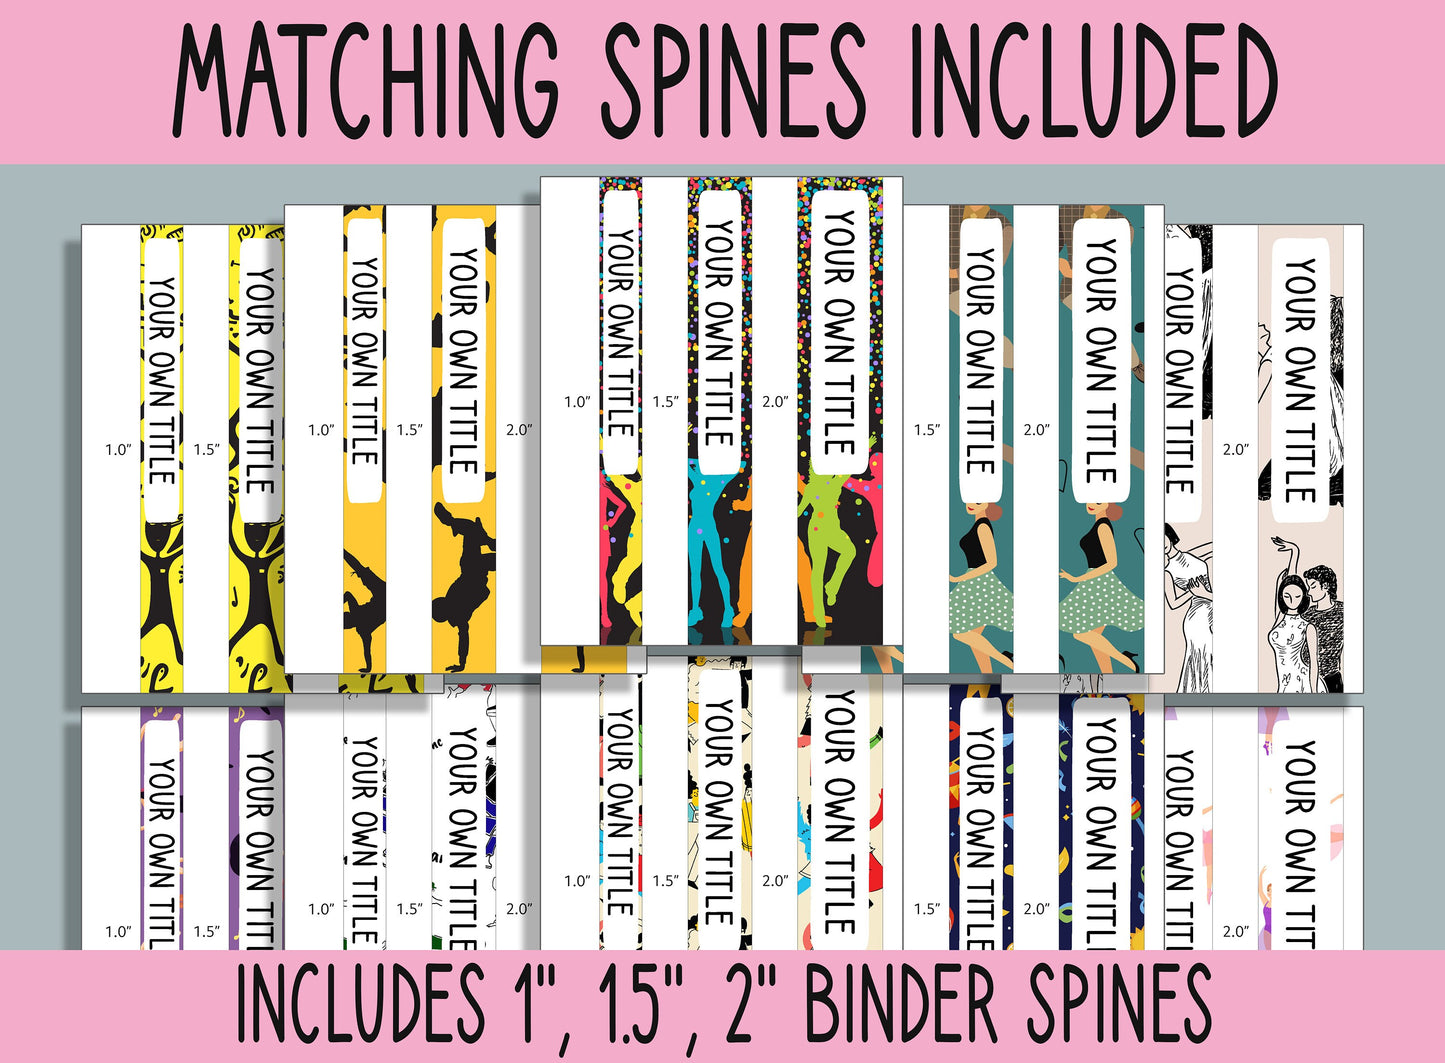 10 Editable Dancing Binder Covers, Includes 1, 1.5, 2" Spines, Available in A4 &US Letter, Editing with PowerPoint or PDF Reader